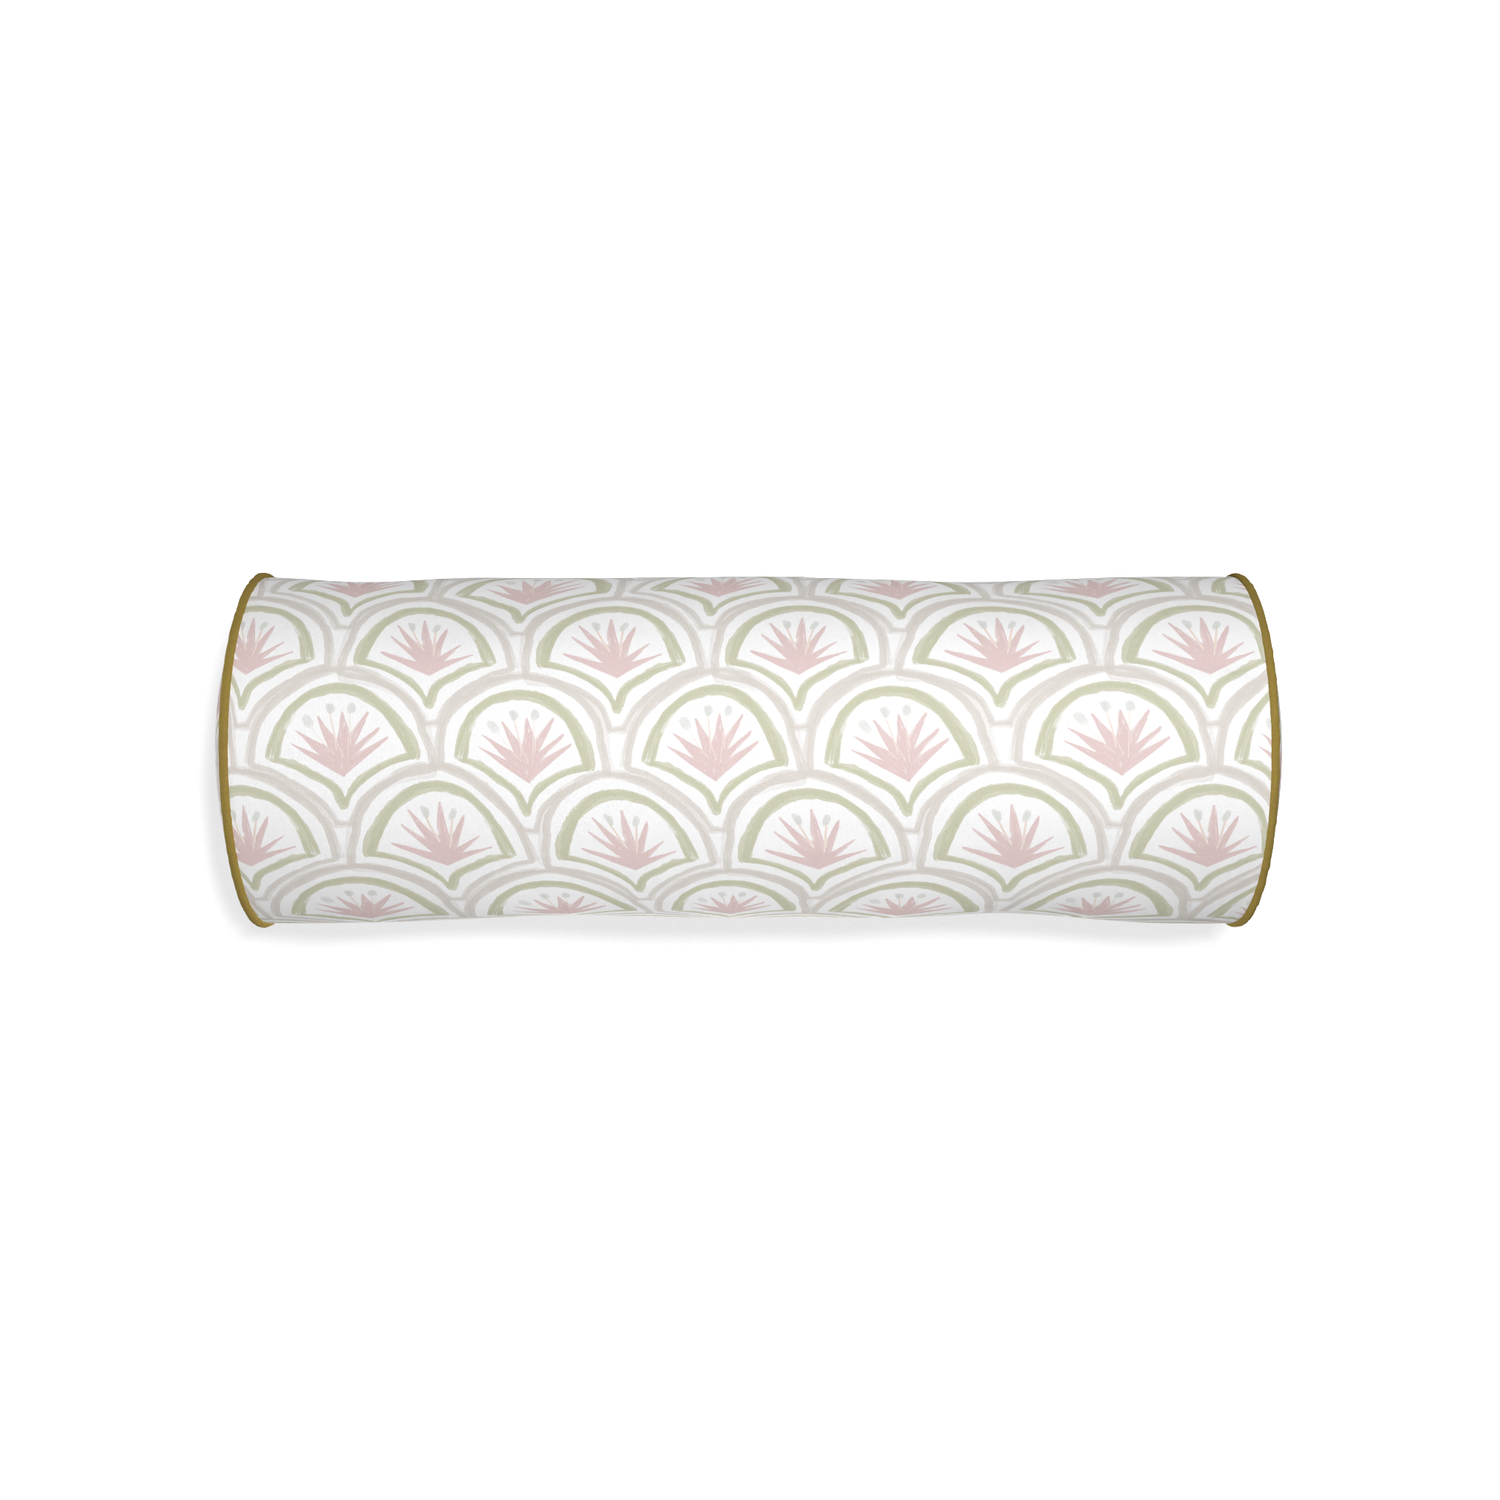 Bolster thatcher rose custom pink & green palmpillow with c piping on white background